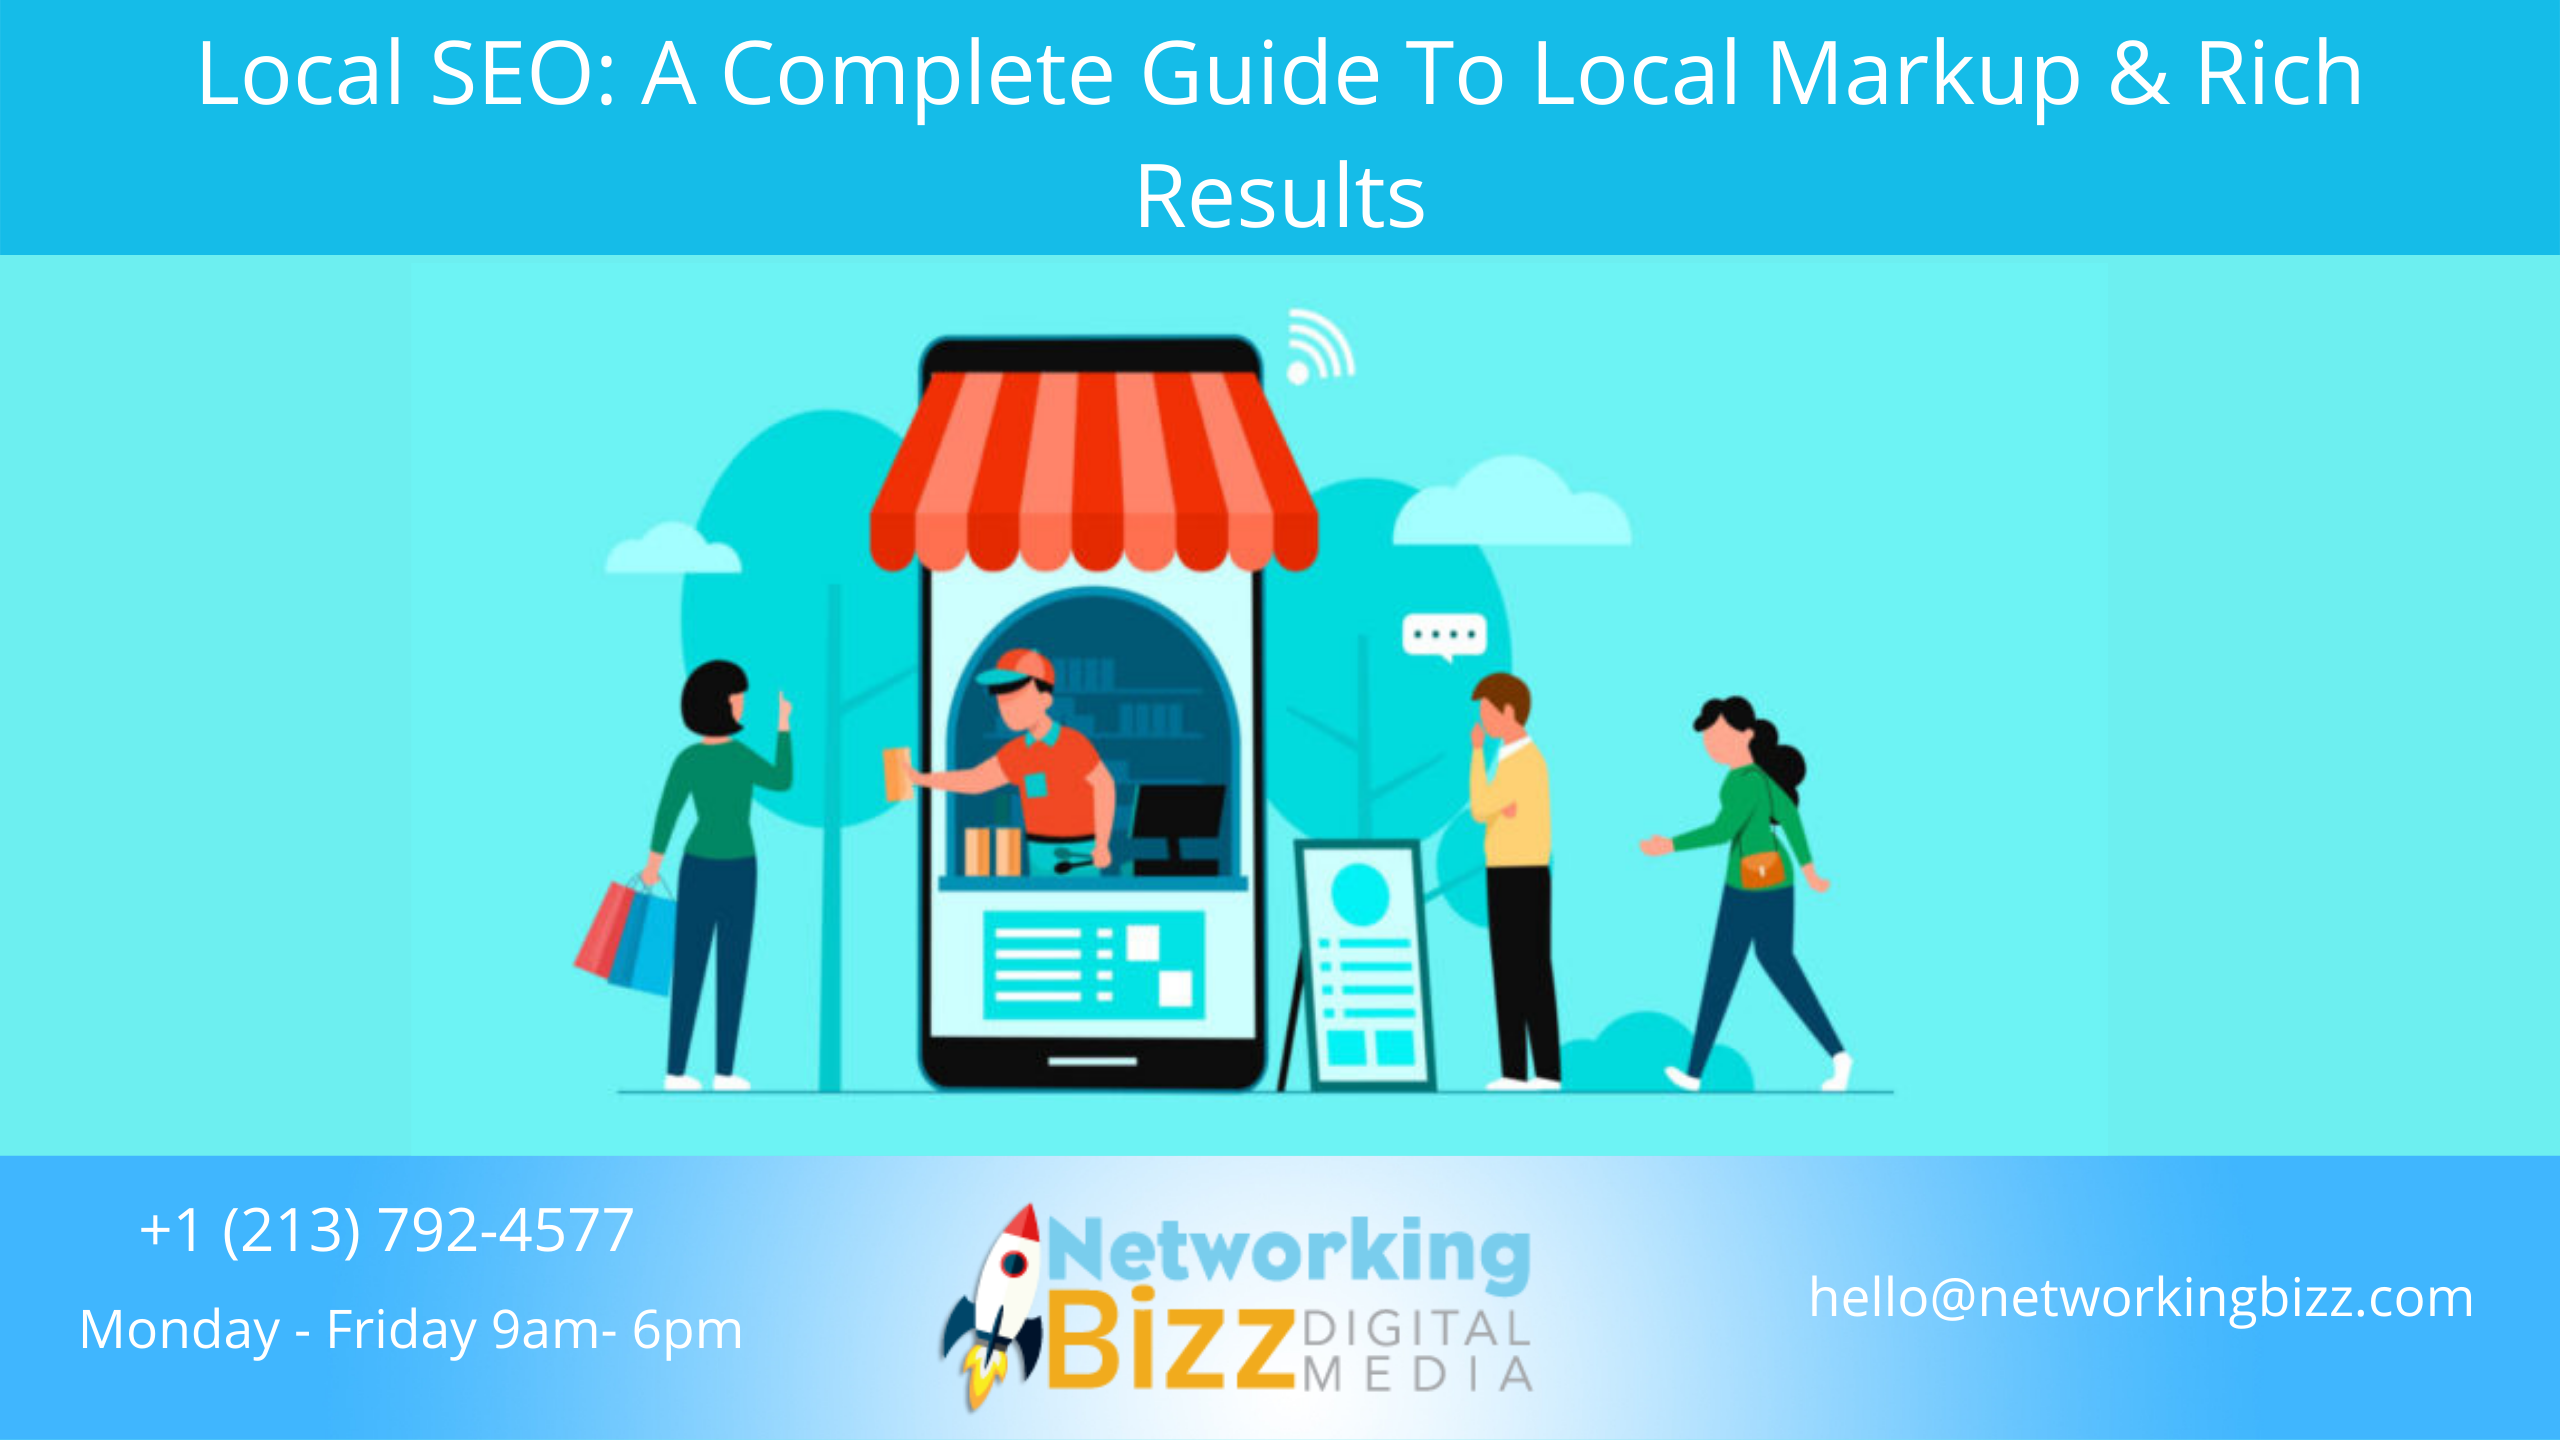 Local SEO: A Complete Guide To Local Markup & Rich Results